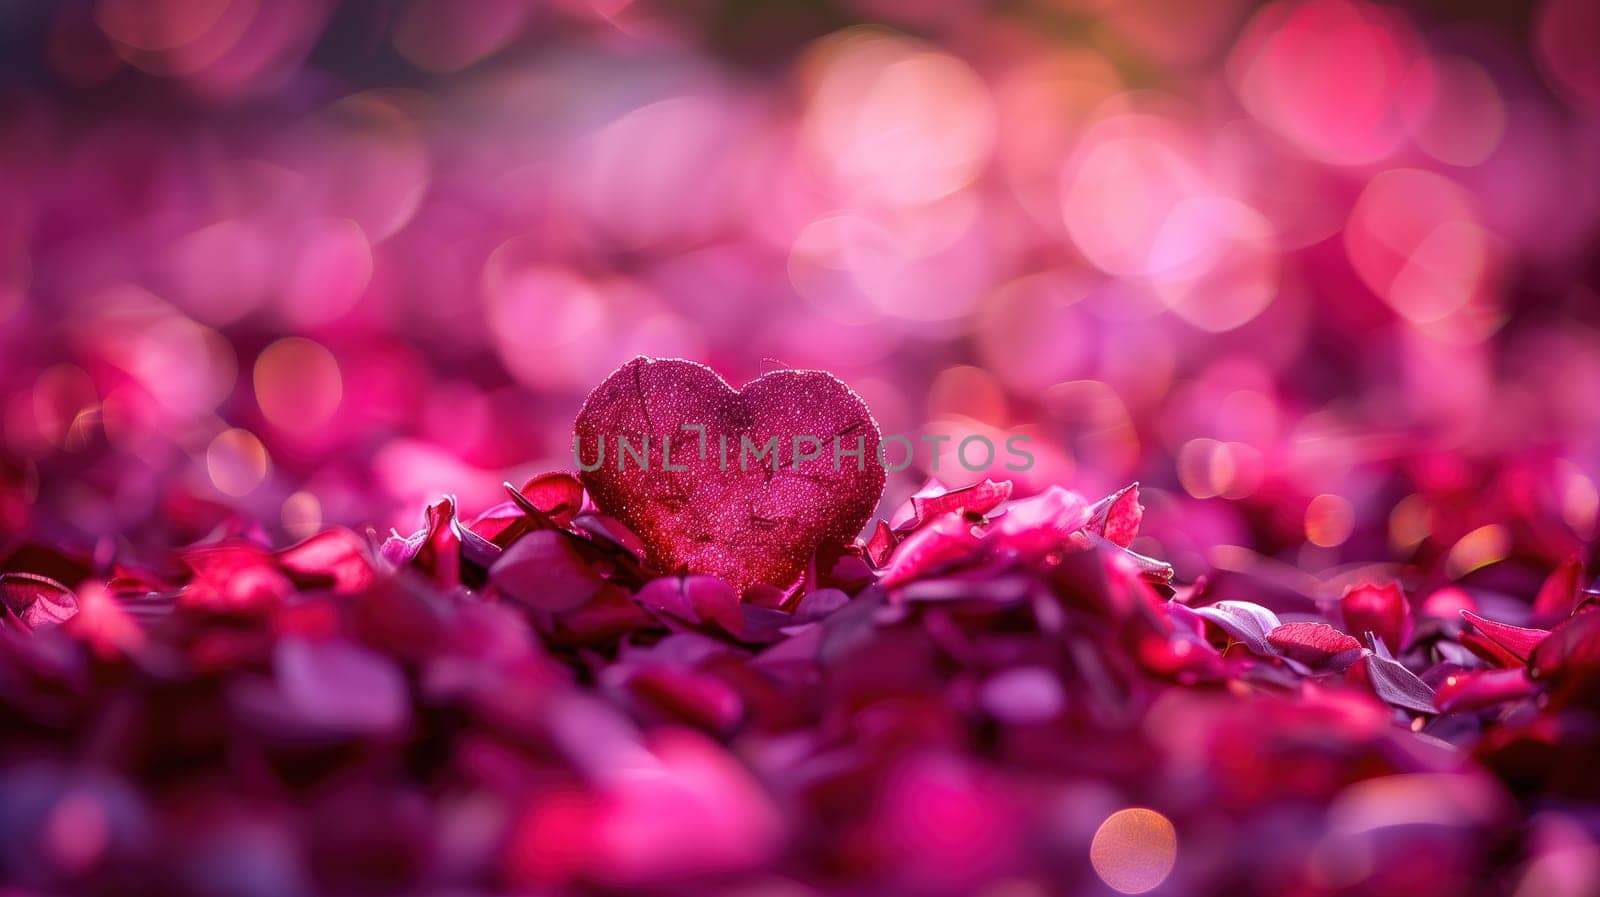 A heart-shaped object is placed in the middle of a bed of colorful flowers. The contrast between the shape and the vibrant flowers creates a visually striking scene.